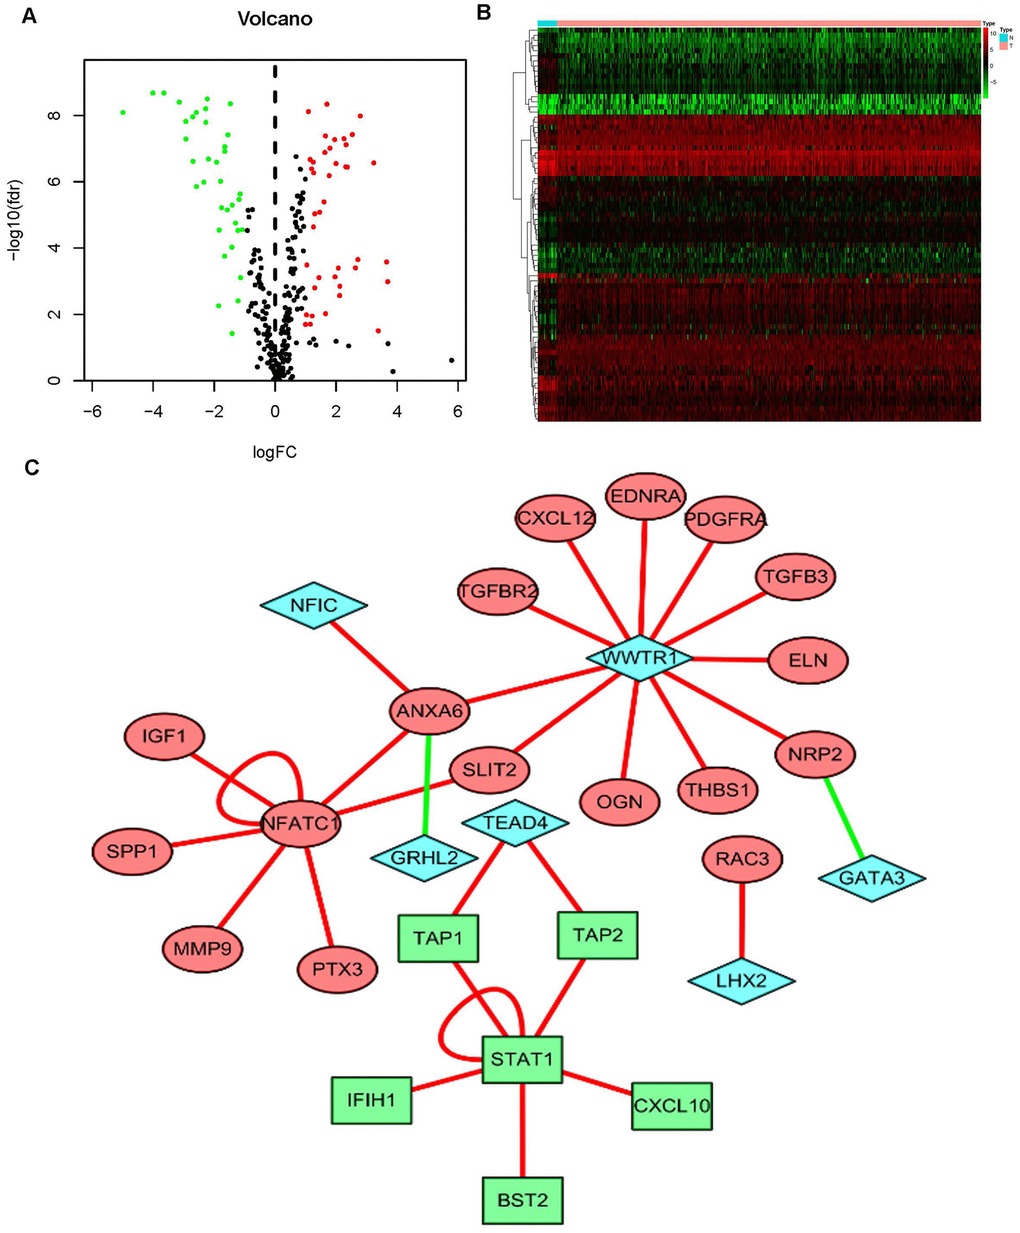 The mediated relationships between sIFRGs and differentially expressed transcription factors. Volcano plot (A) and heatmap (B) showing the differentially expressed transcription factors (TFs). The black dots represent TFs without differential expression; the red dots represent upregulated TFs, and the green dots represent downregulated TFs. FDR 2 | FC | >1 and P C) was composed of relevant TFs and sIFRGs. The red circles represent upregulated sIFRGs, the green rectangles represent downregulated sIFRGs, and the blue rhombuses represent relevant TFs. The red lines represent positive regulation, and the green lines represent negative regulation.